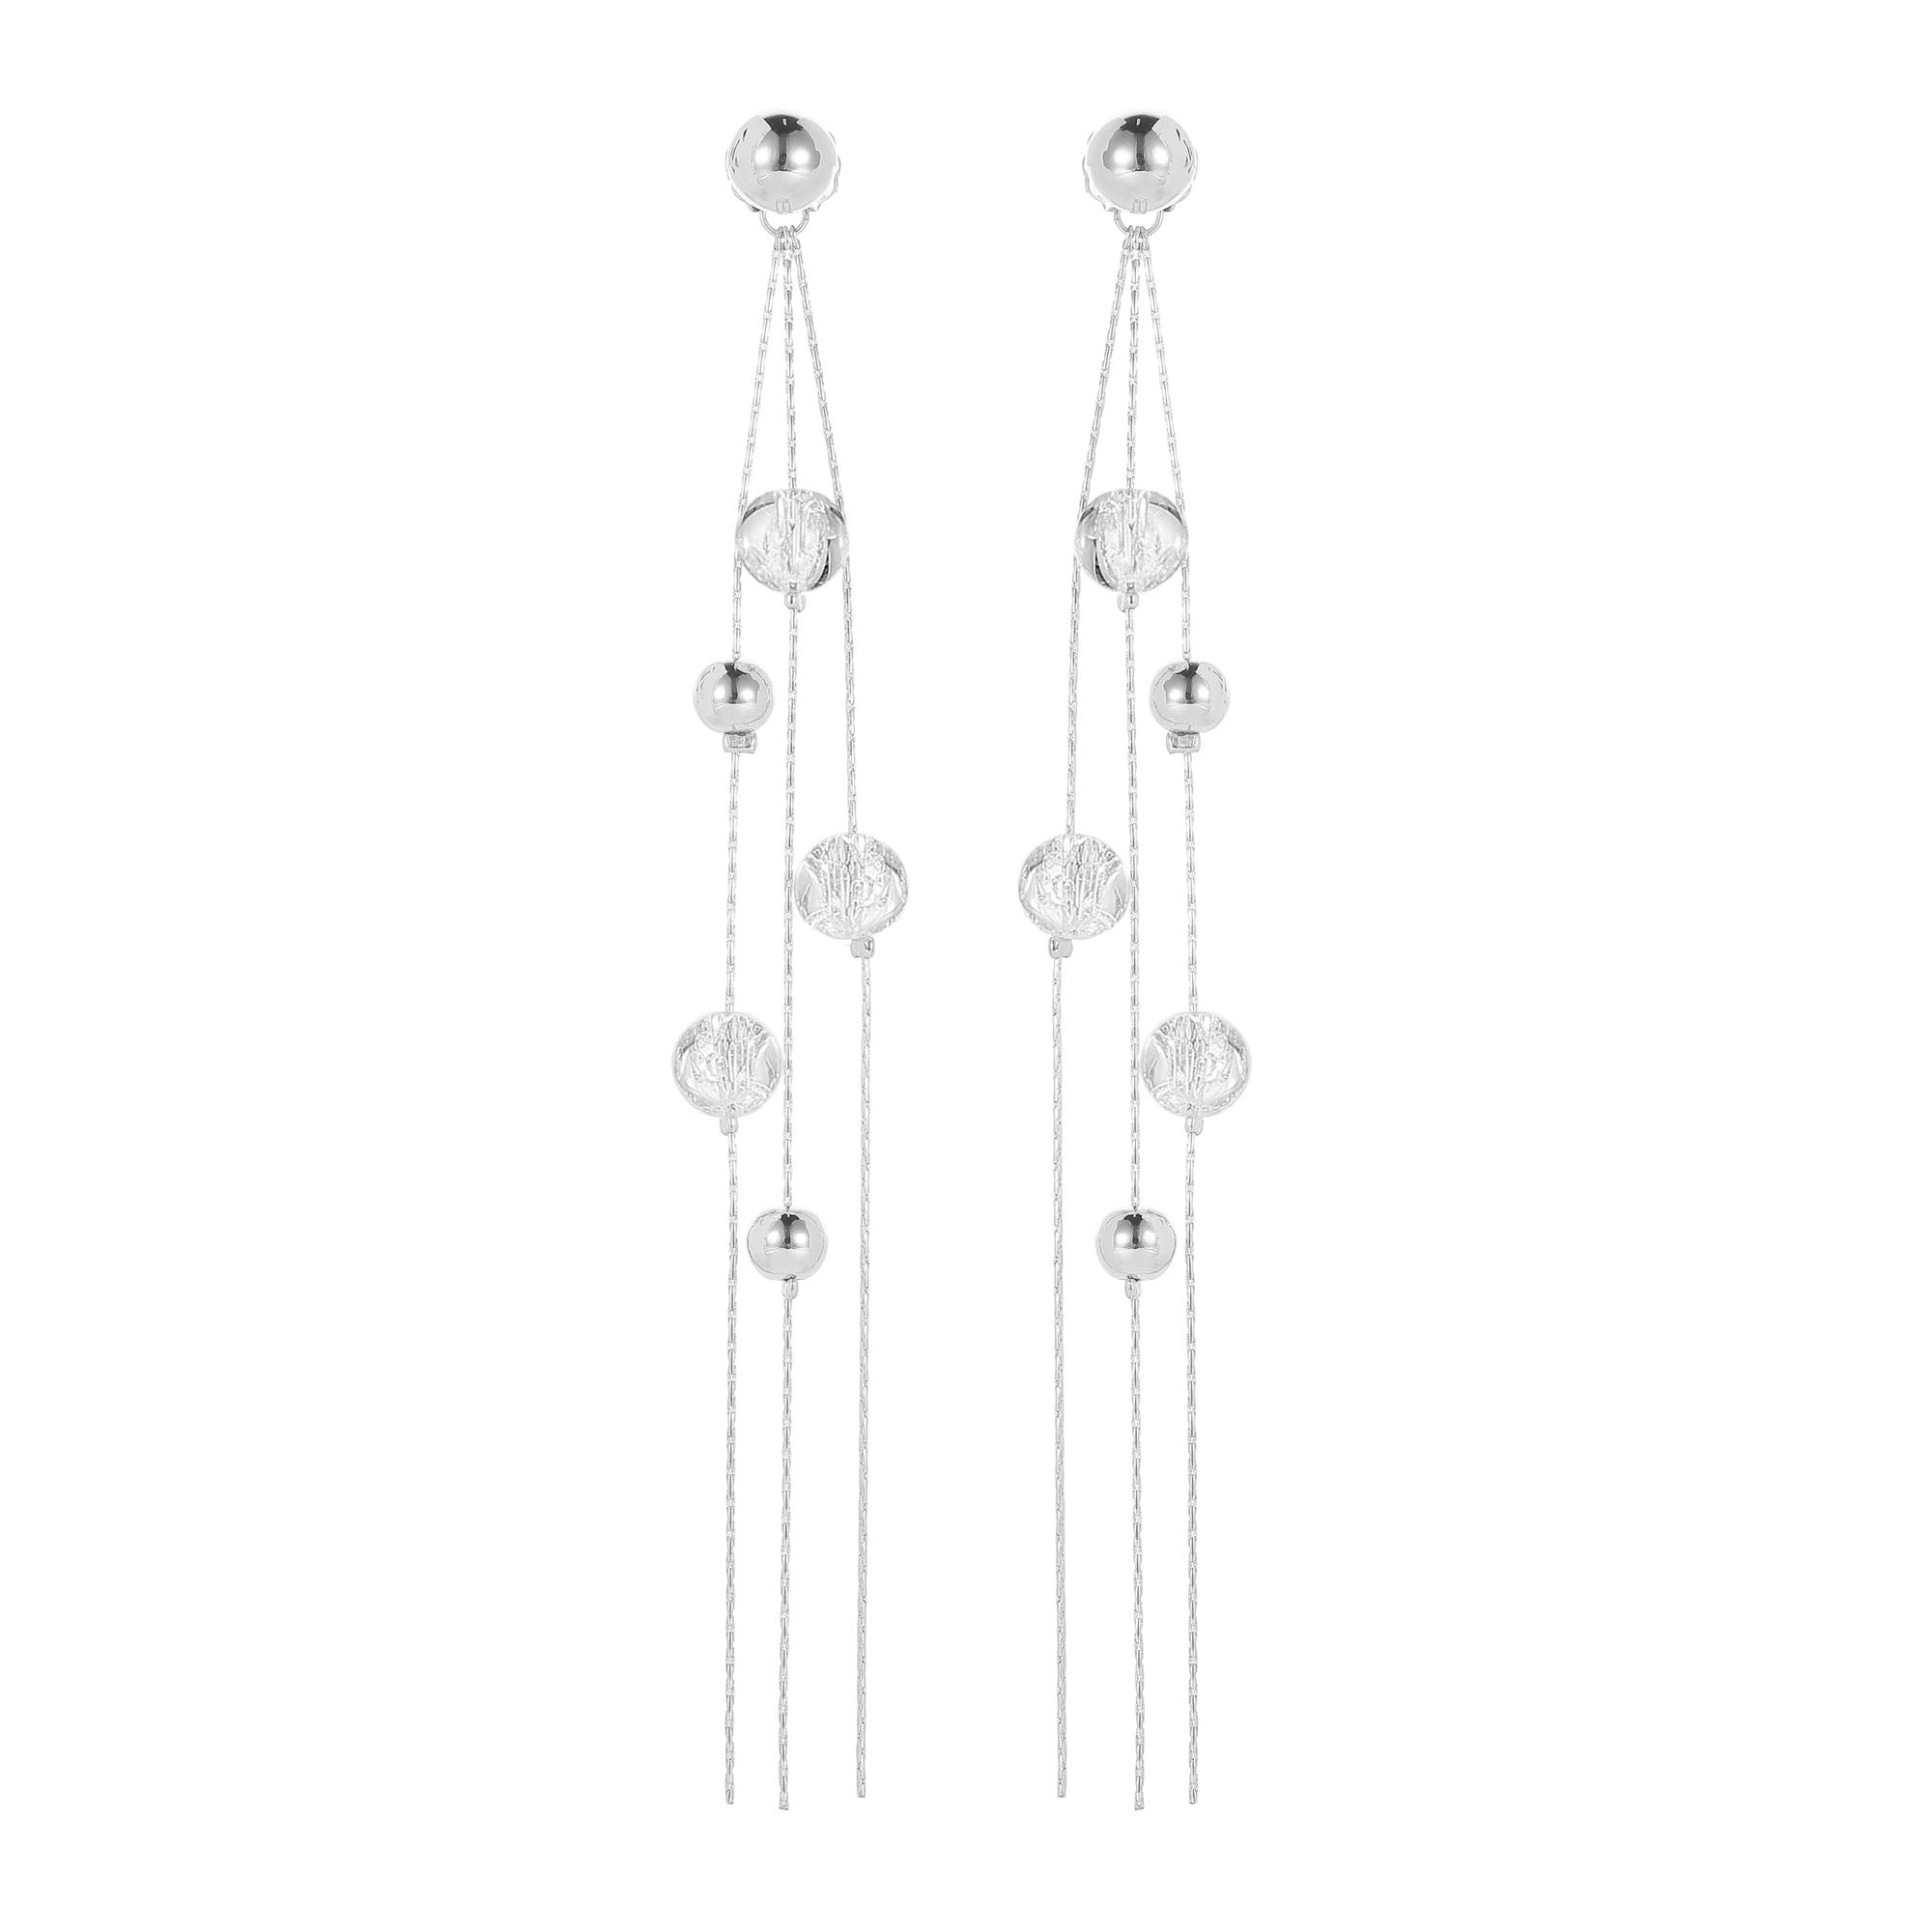 Classicharms FrostLily Azeztulite Crystal and Silver Bead Drop Earrings